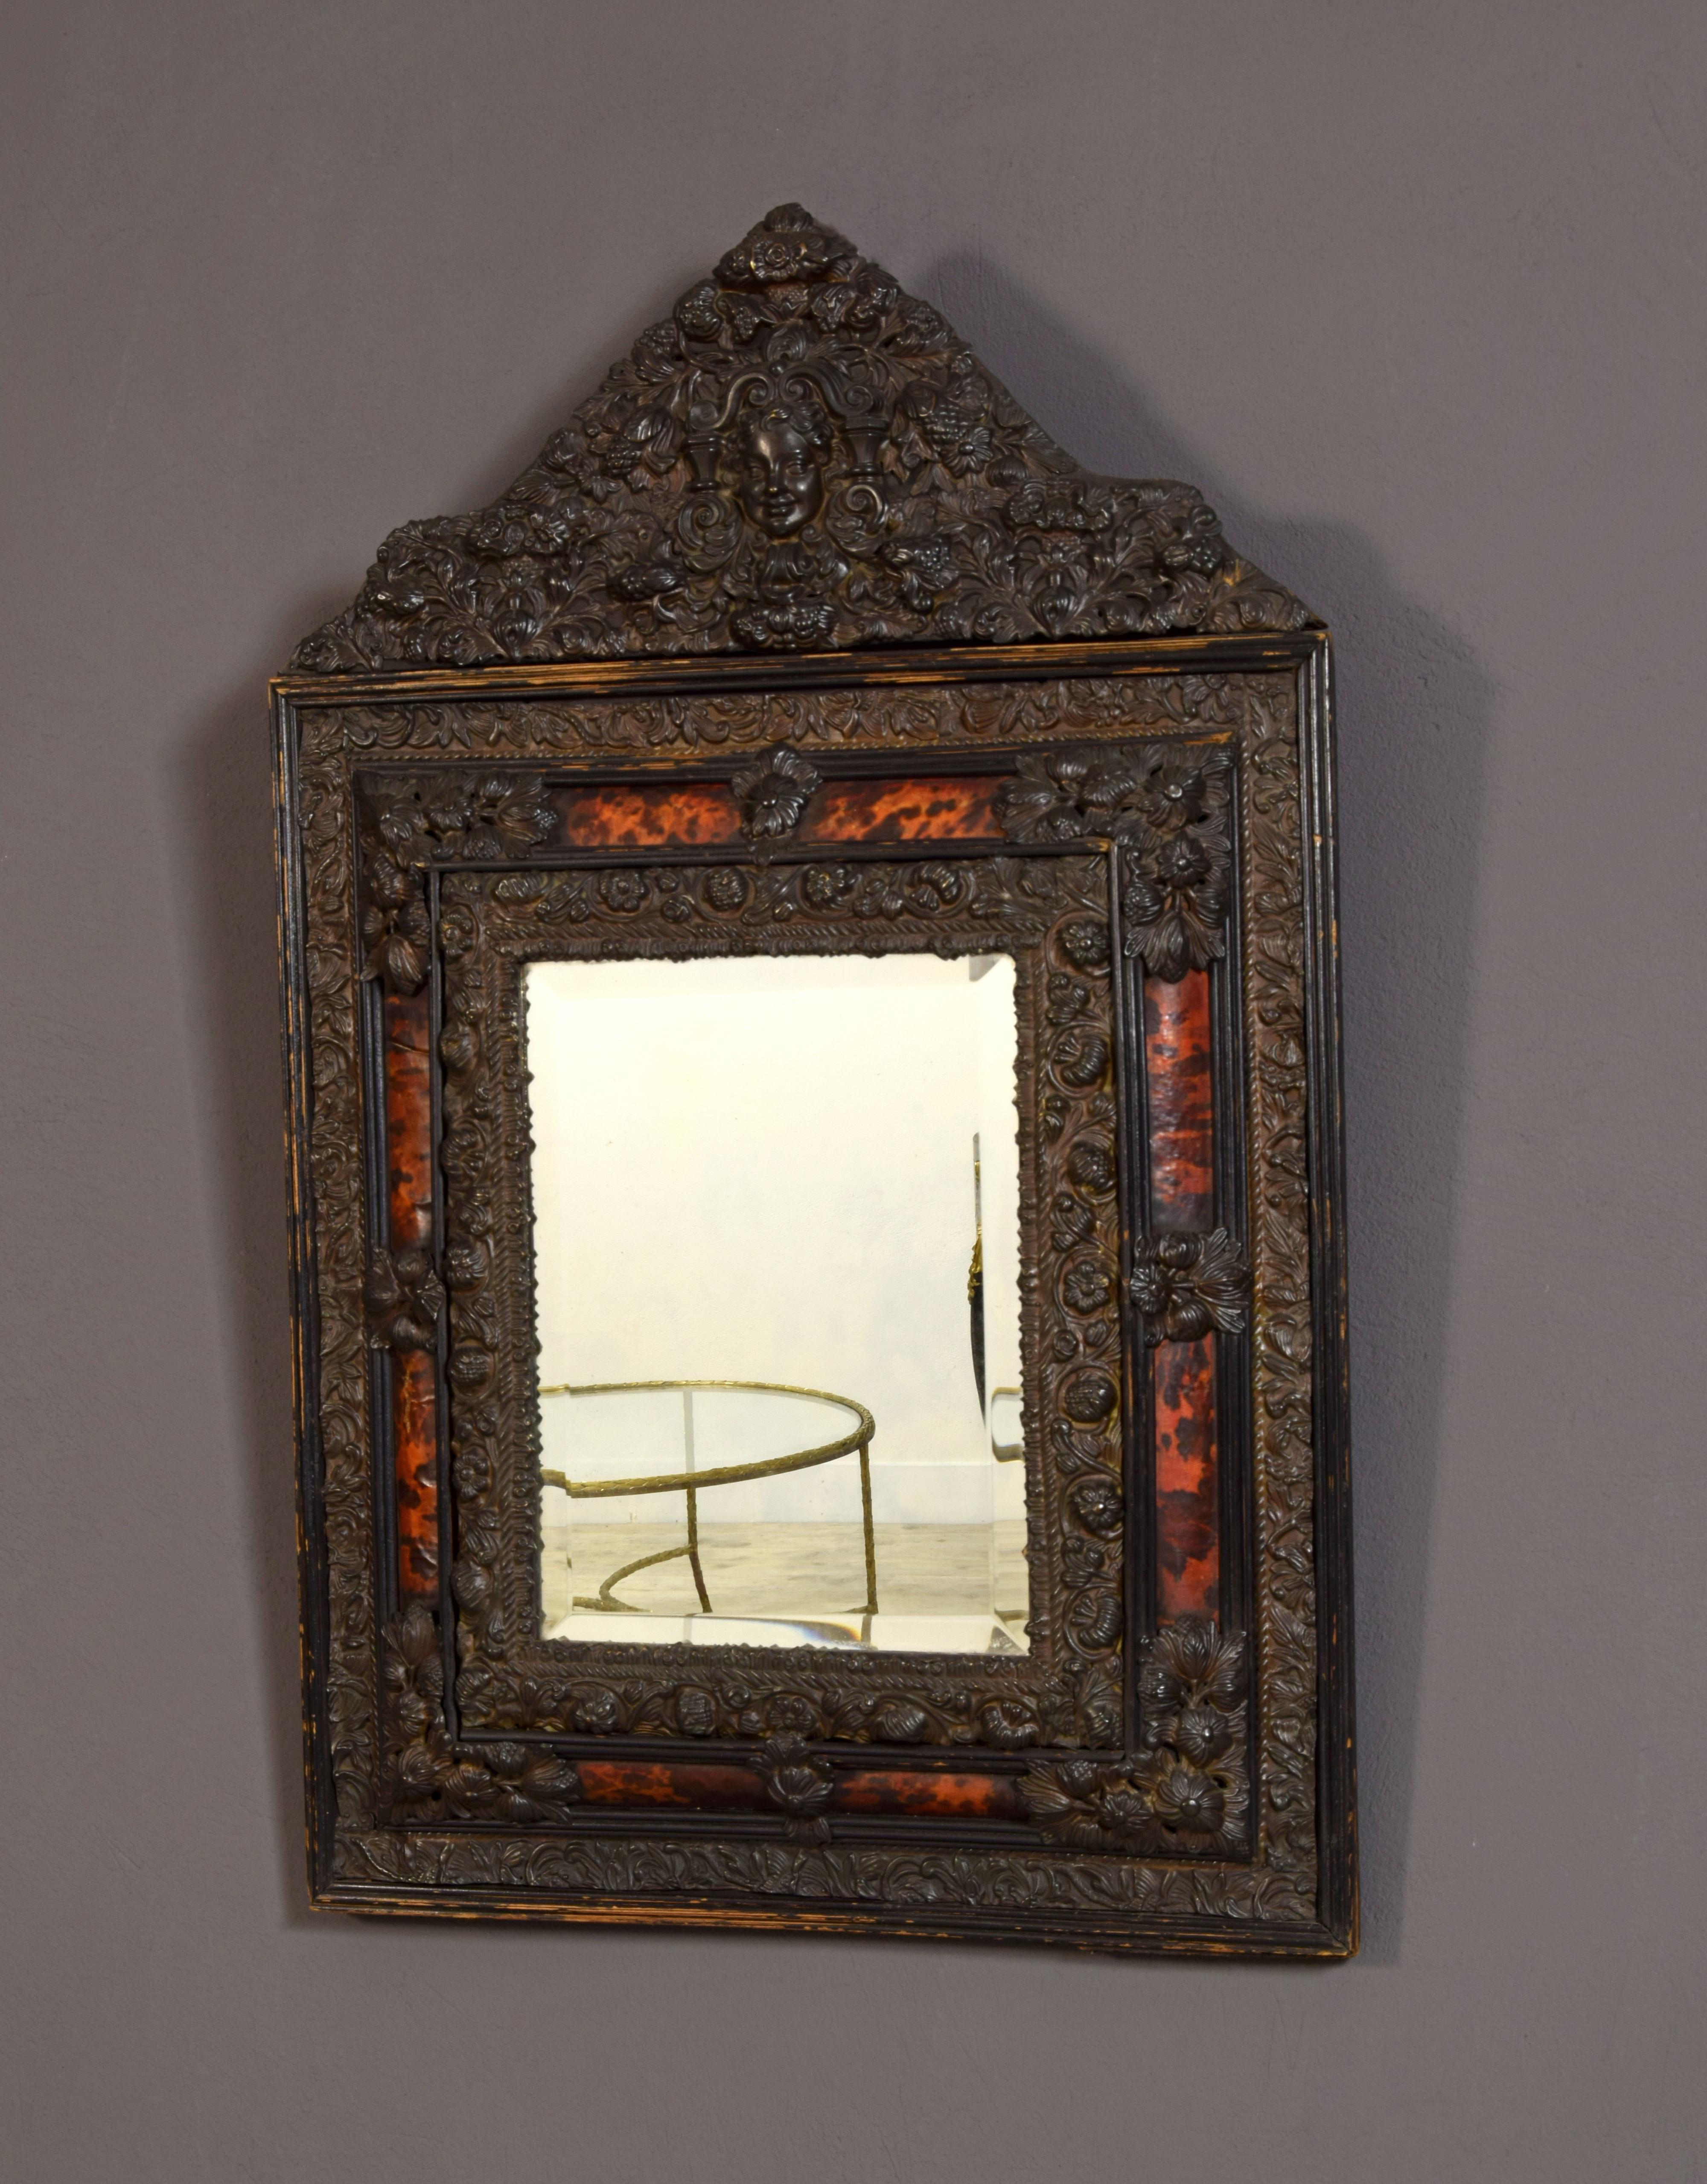 19th century, Northern Europe embossed and burnished metal mirror

Small and refined mirror of the 19th century in Regency style, made in the north of Europe, in embossed and burnished brass. This particular mirror has an ebonized external frame